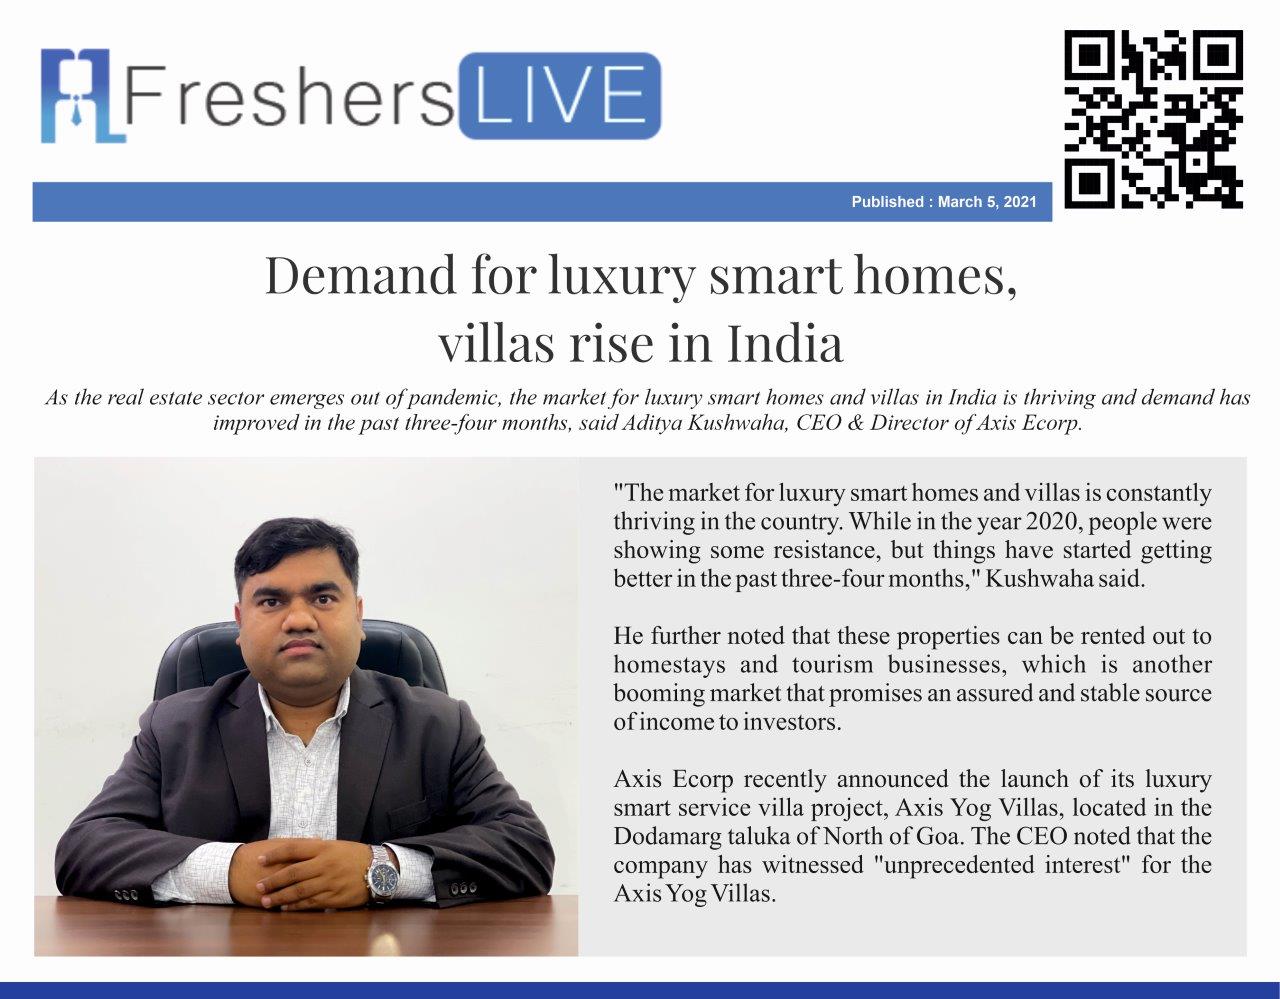 Demand for luxury smart homes, villas rise in India